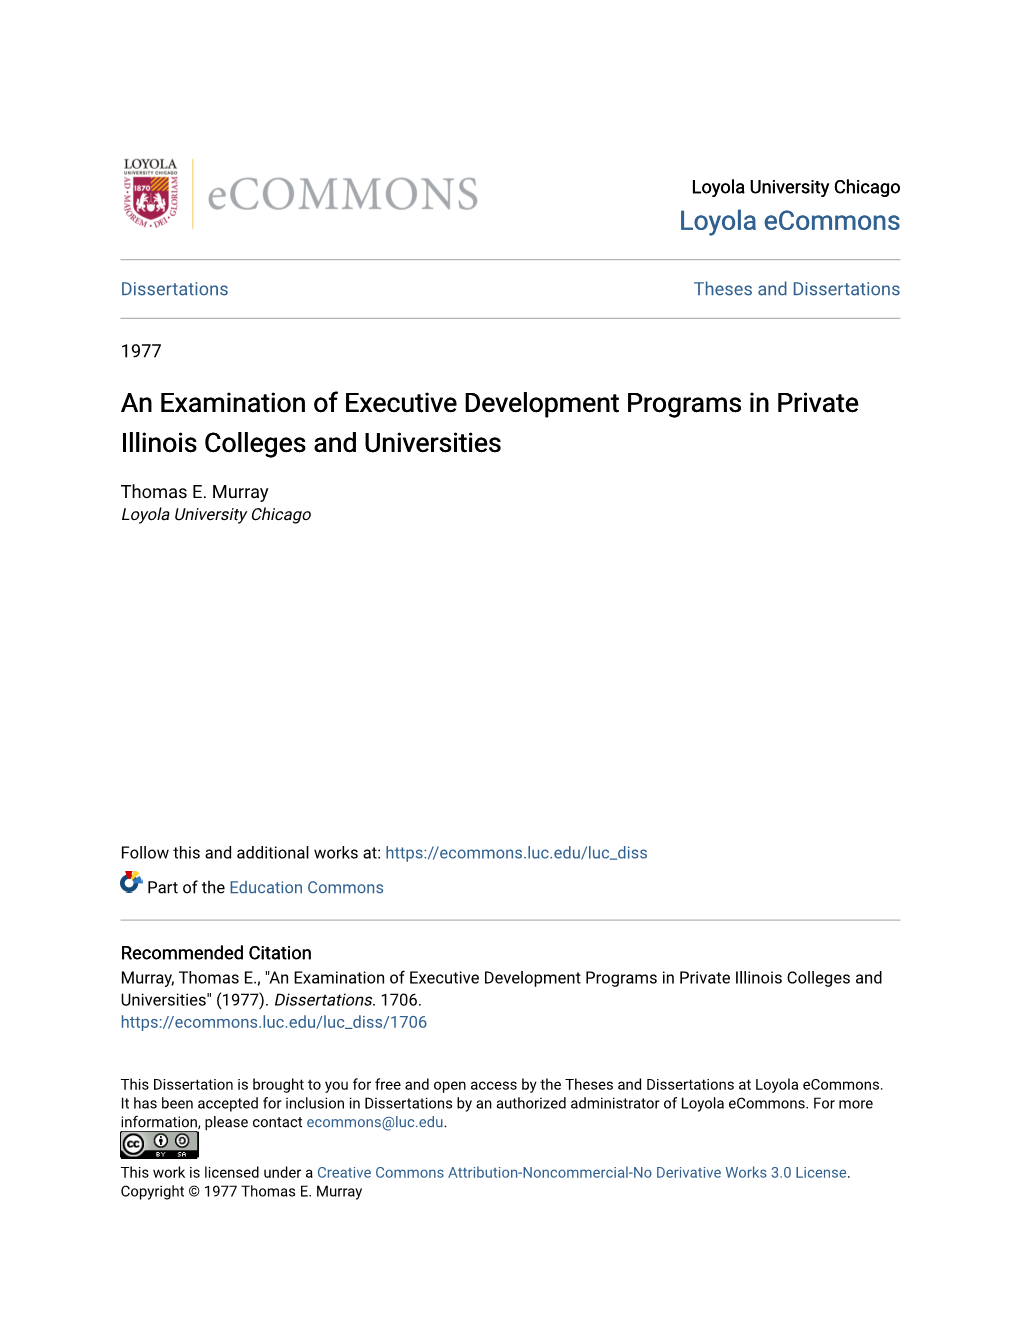 An Examination of Executive Development Programs in Private Illinois Colleges and Universities